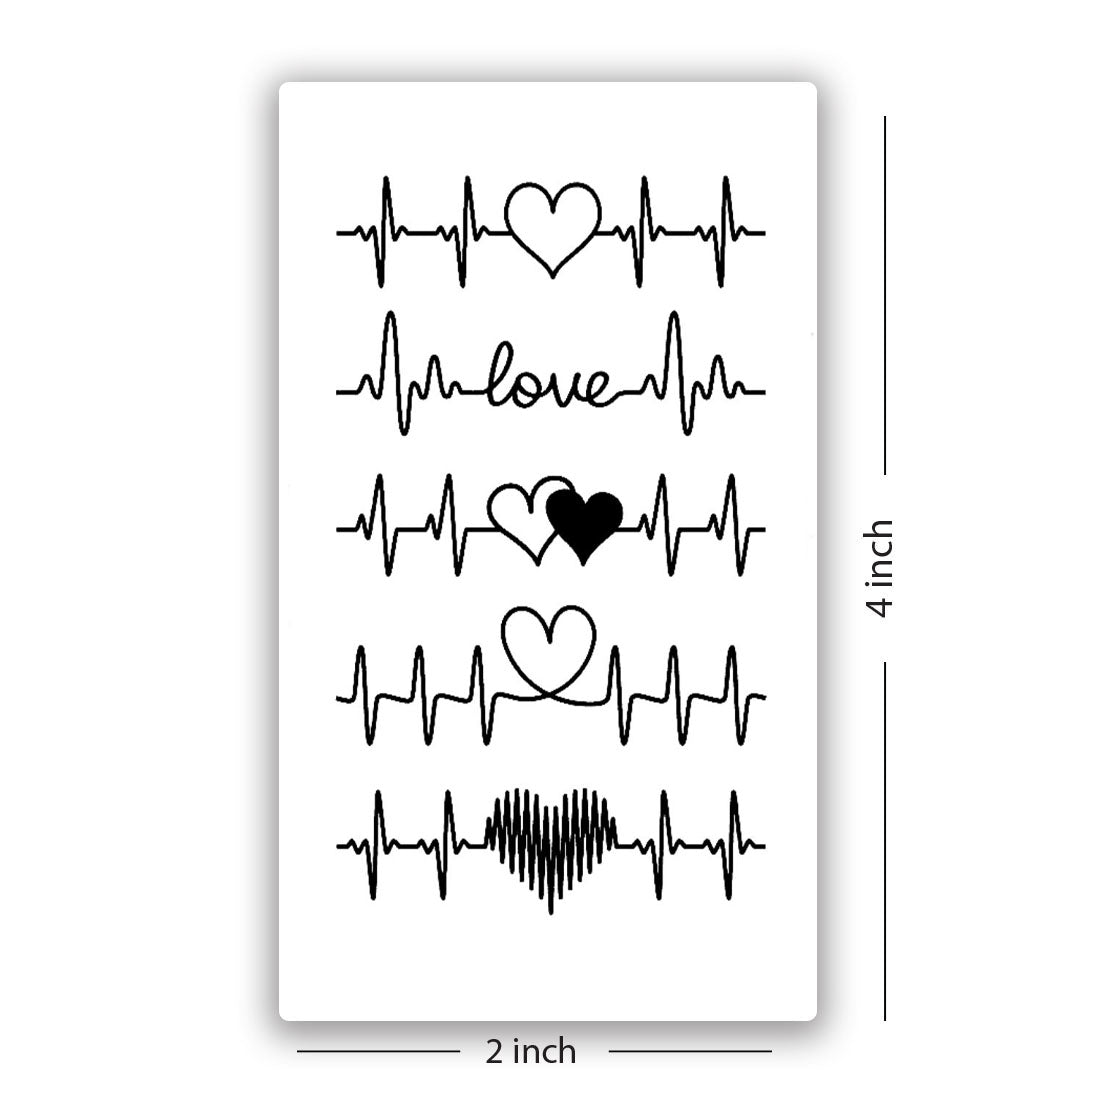 25 Heartbeat Tattoo Ideas and Design Lines – Feel your own Rhythm - YouTube